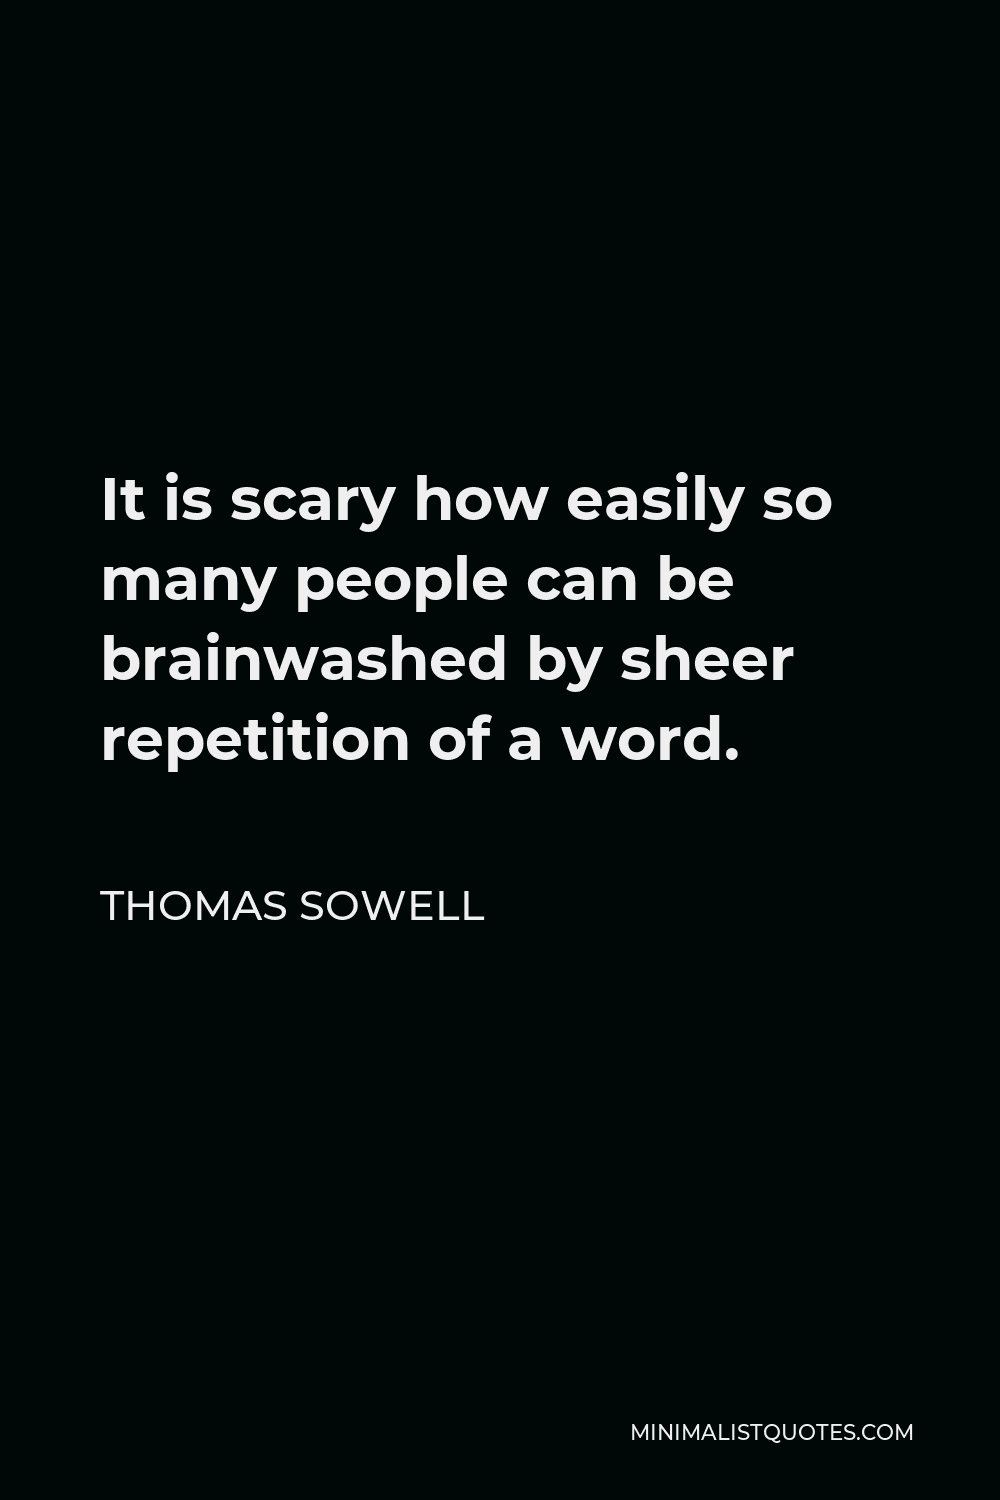 Thomas Sowell Quote - It is scary how easily so many people can be brainwashed by sheer repetition of a word.